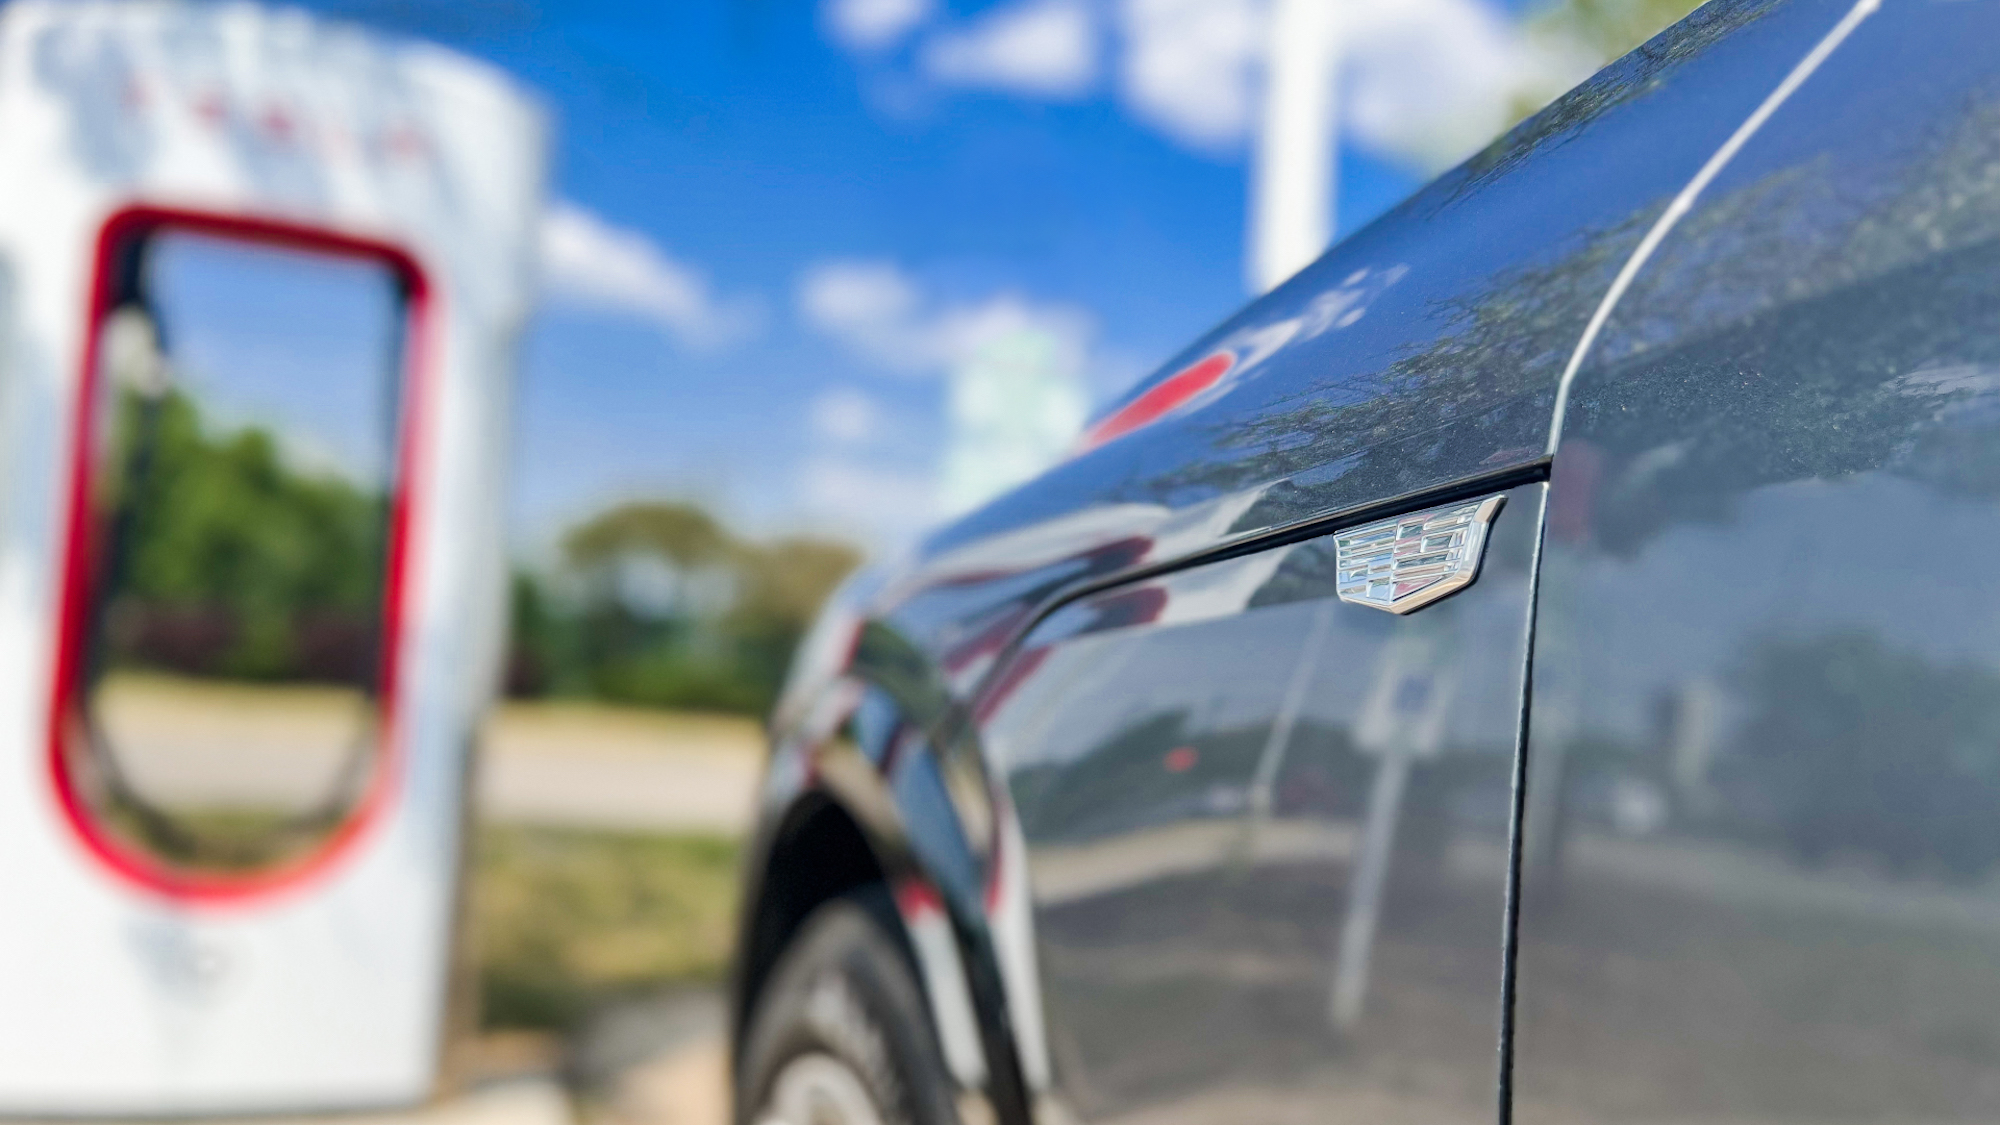 GM's EV models can soon use Tesla chargers